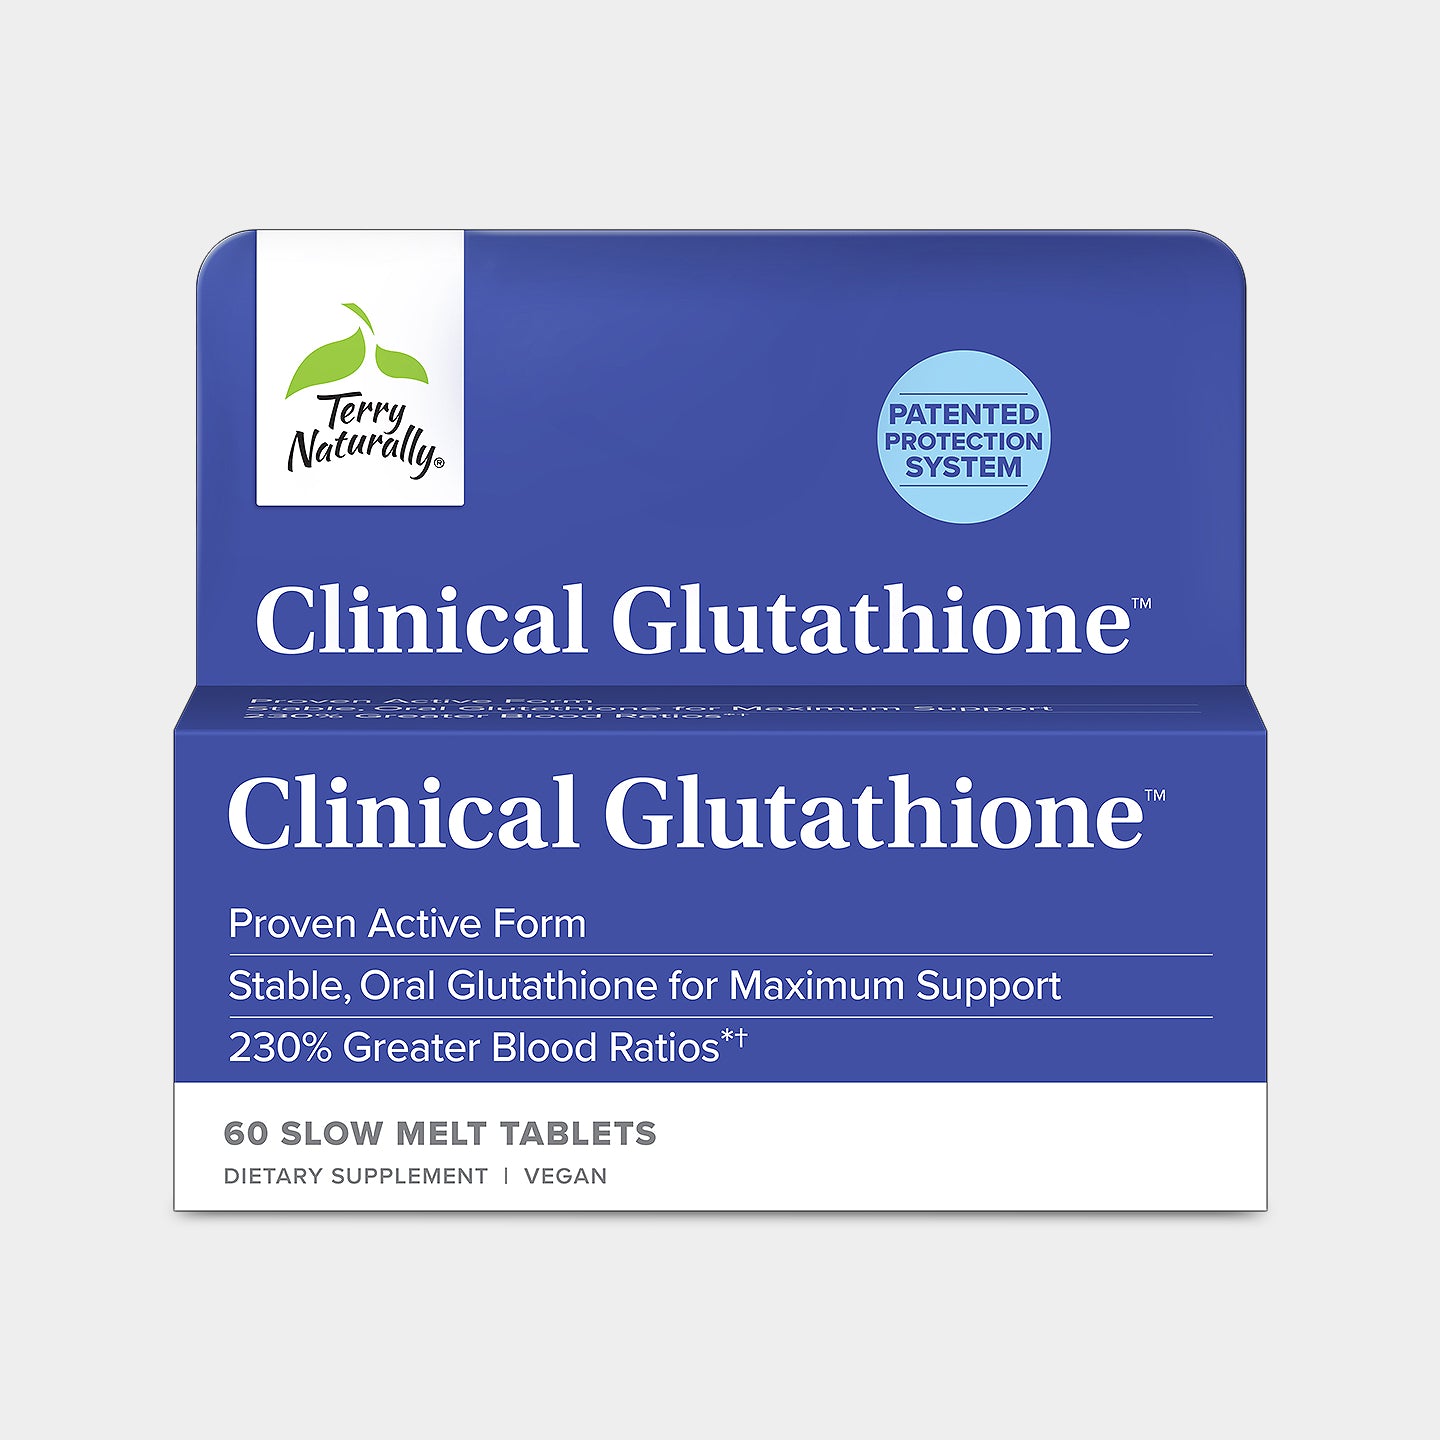 Terry Naturally Clinical Glutathione A1